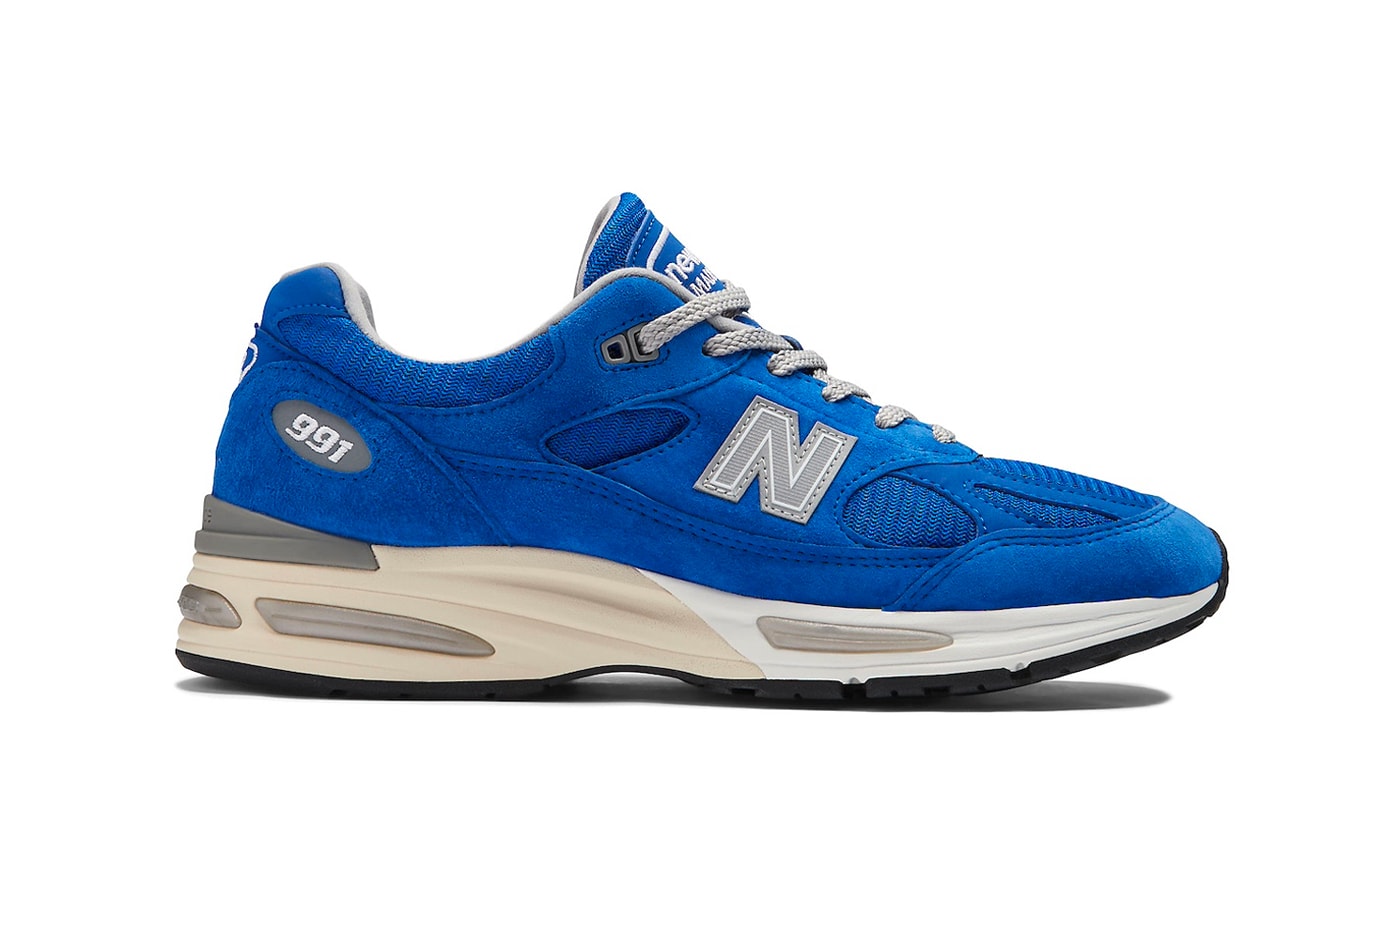 Official Look at the New Balance 991v2 Made in UK "Blue" Silver Blue/Turbulence-Quiet Grey U991BL2